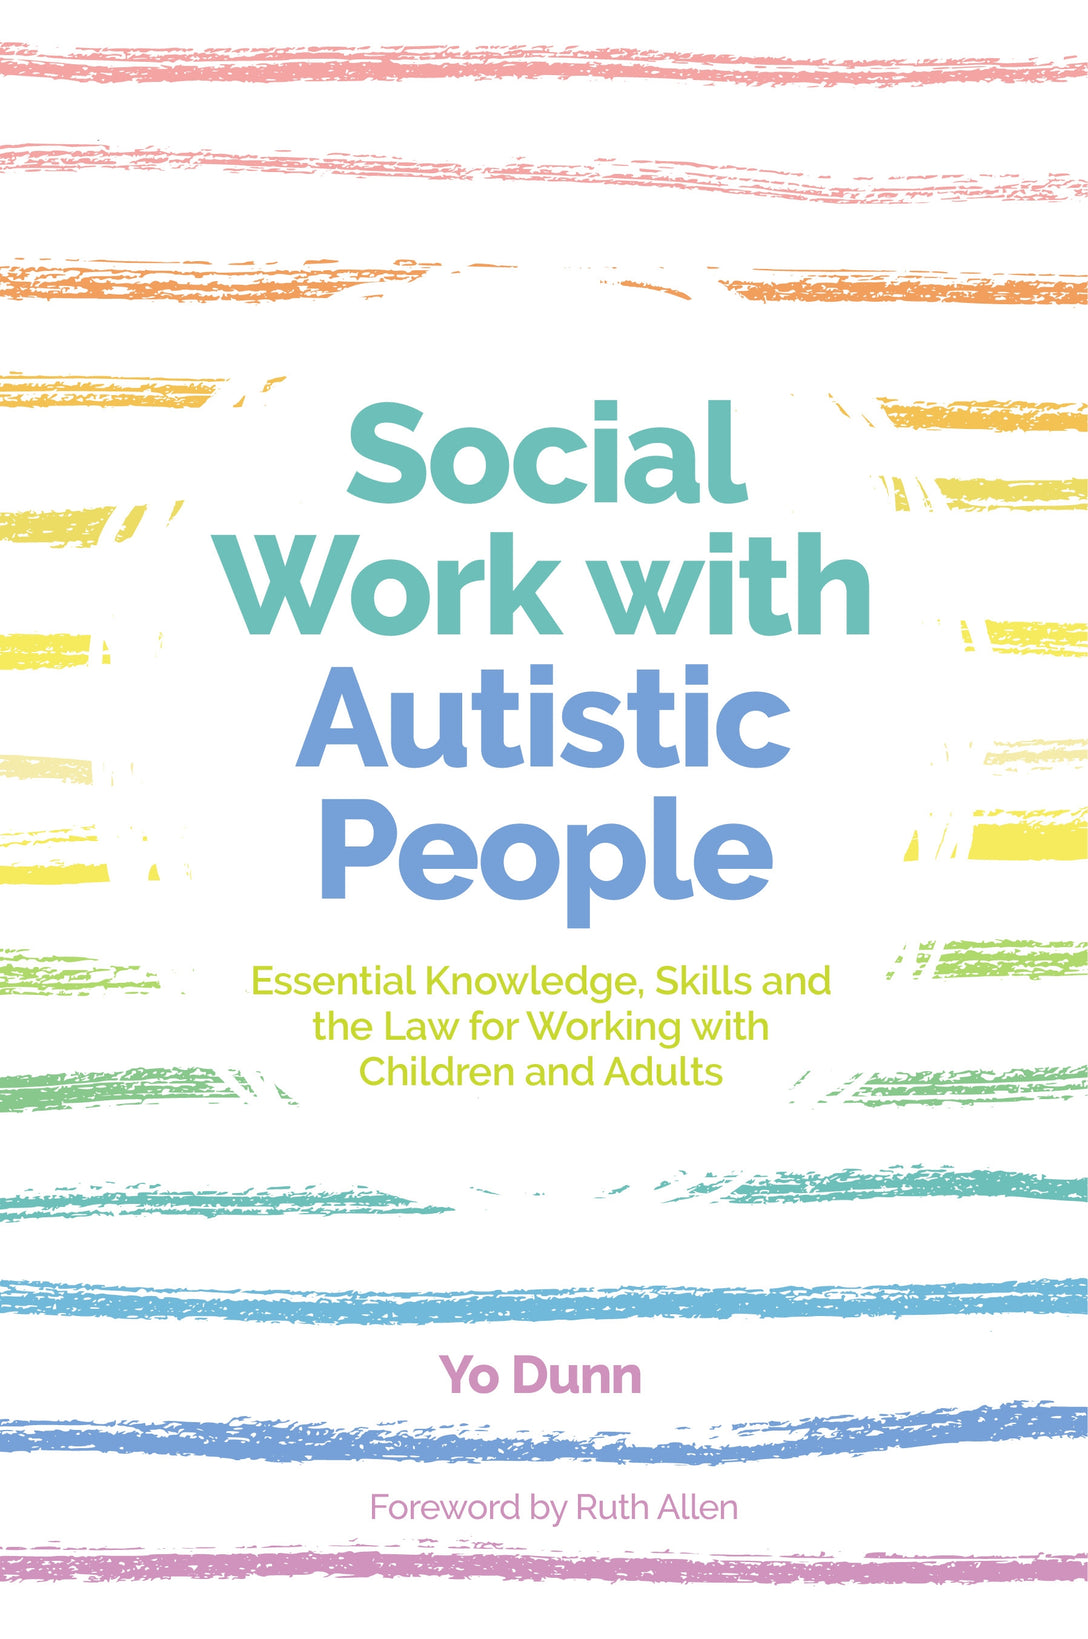 Social Work with Autistic People by Yo Dunn, Alex Ruck Ruck Keene, Ruth Allen